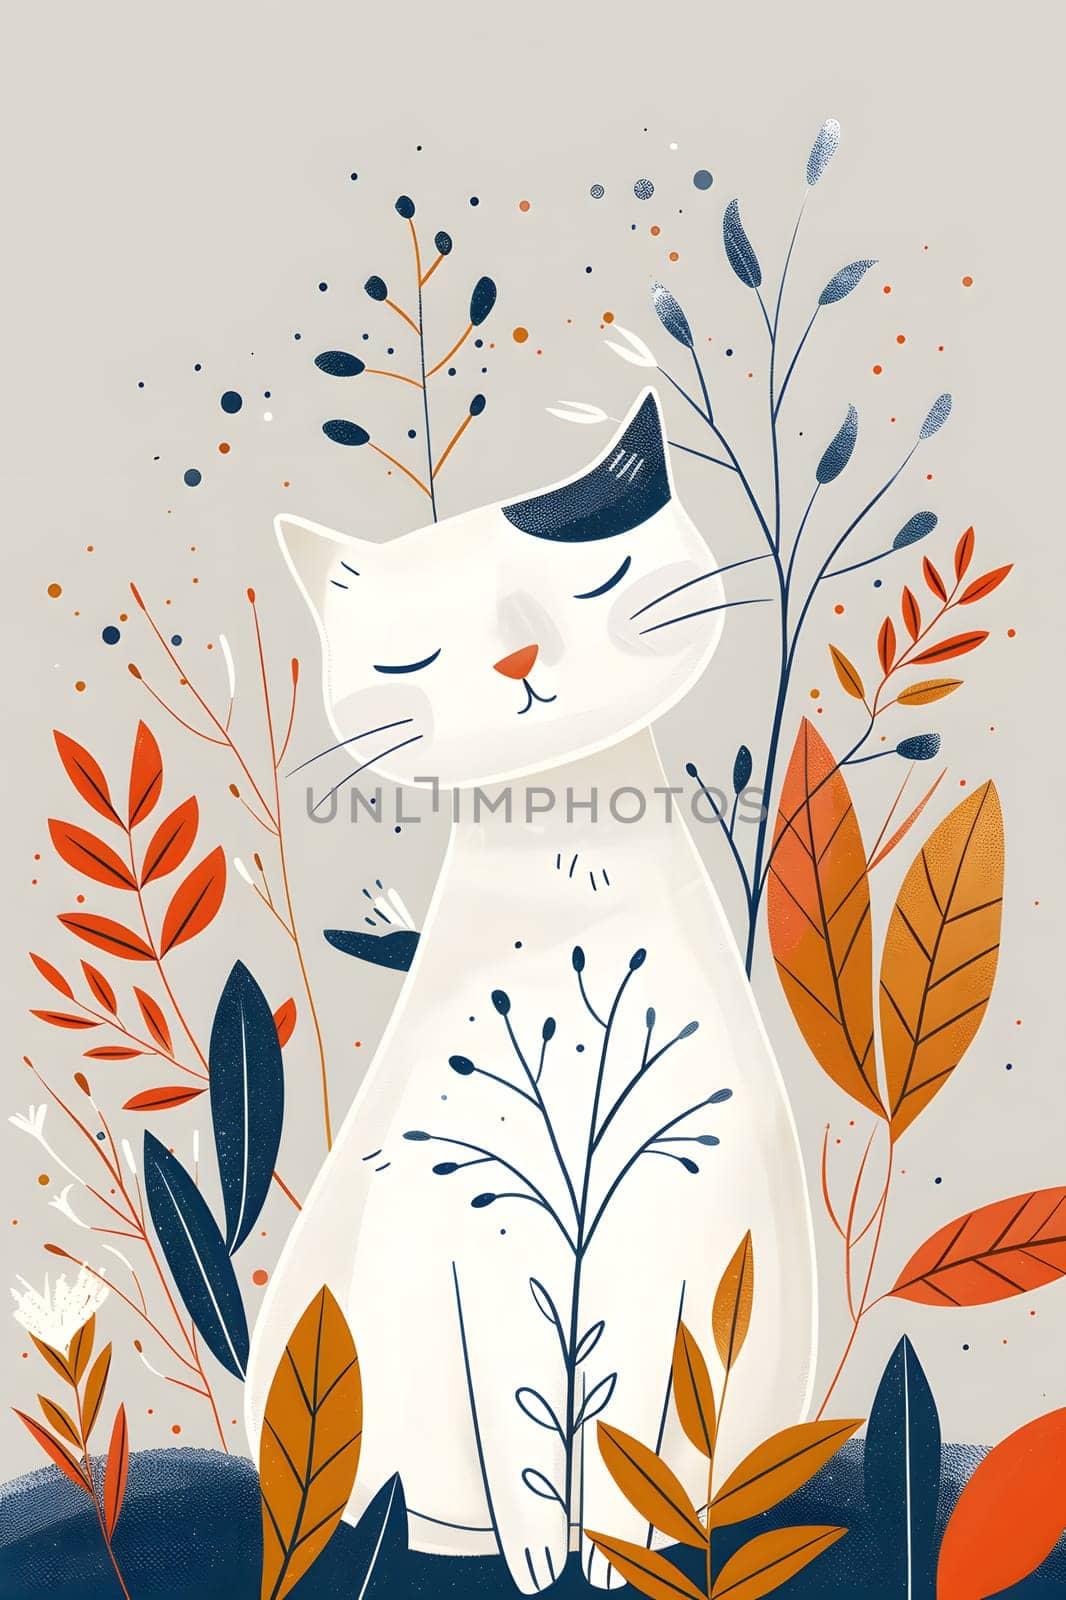 A white cat peacefully rests among leaves in a field by Nadtochiy